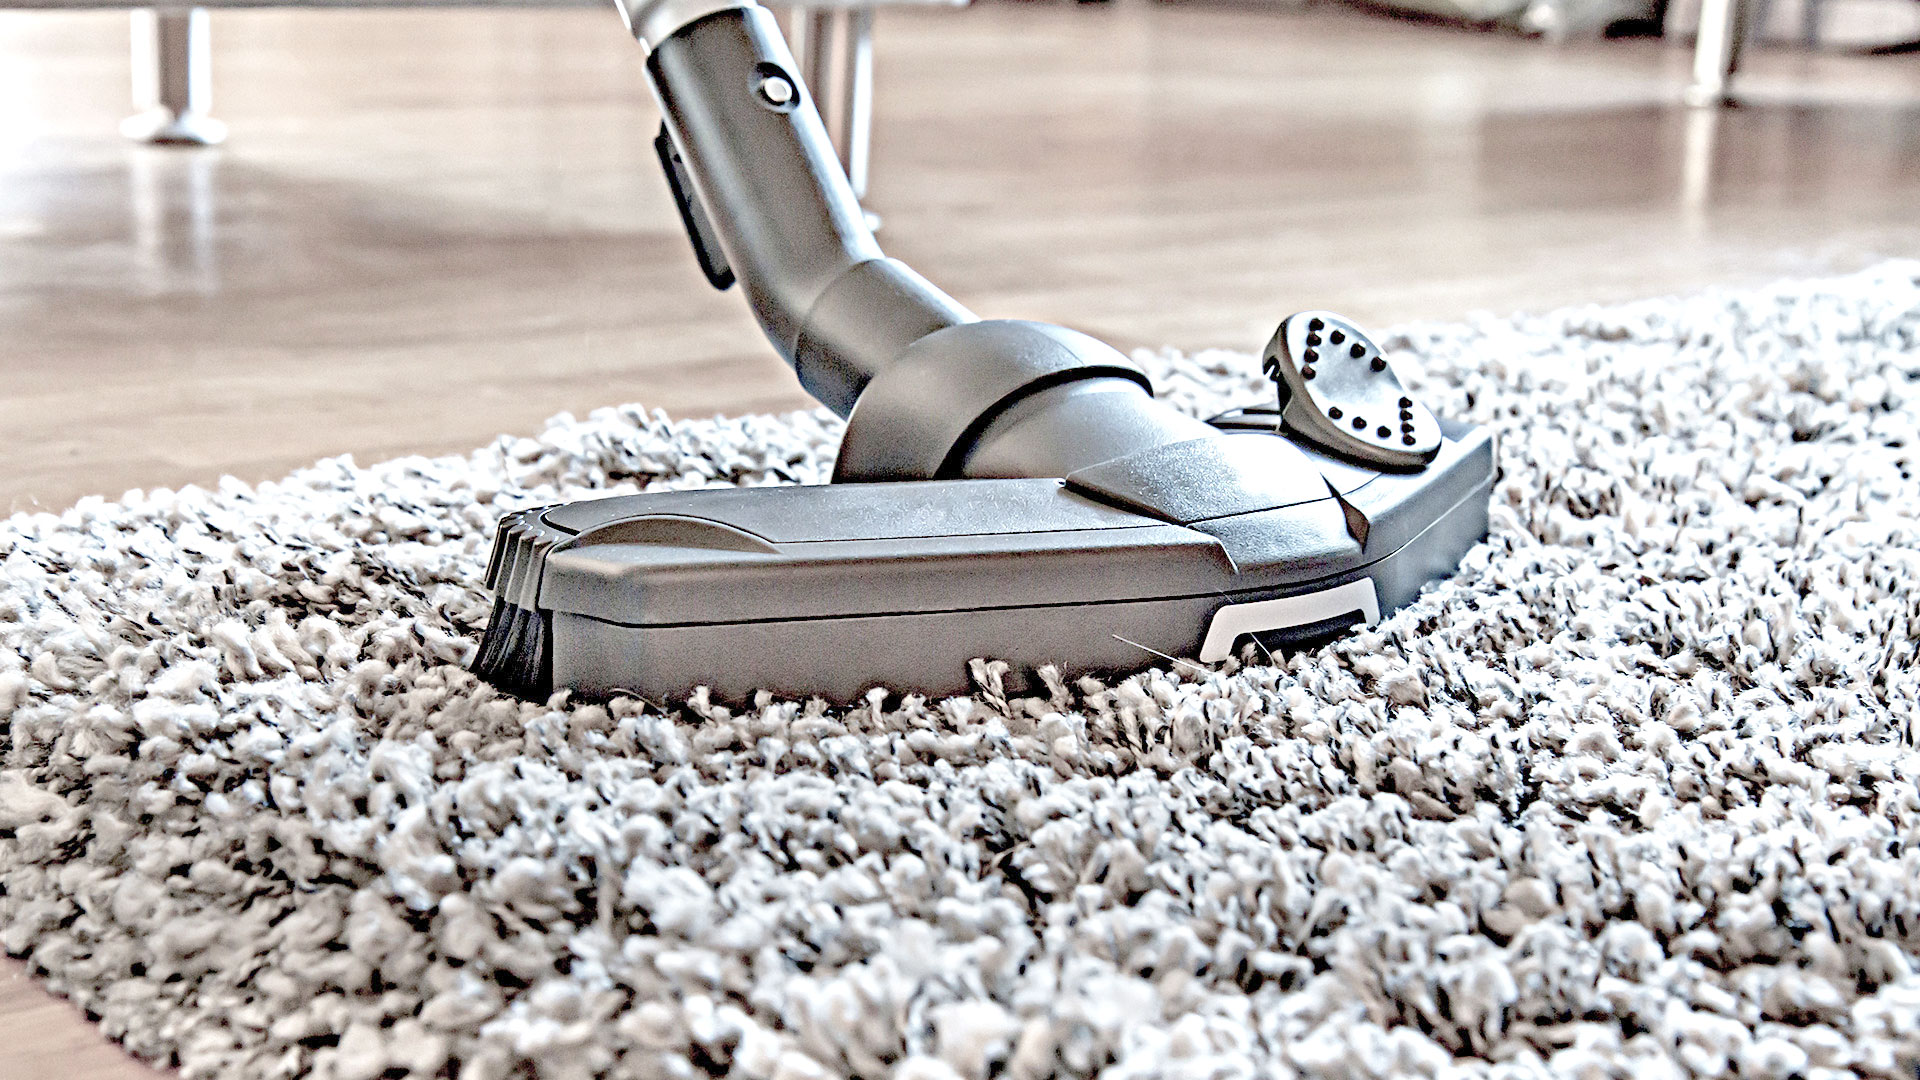 Residential Carpet Cleaning Spokane Janitorial Services Commercial And